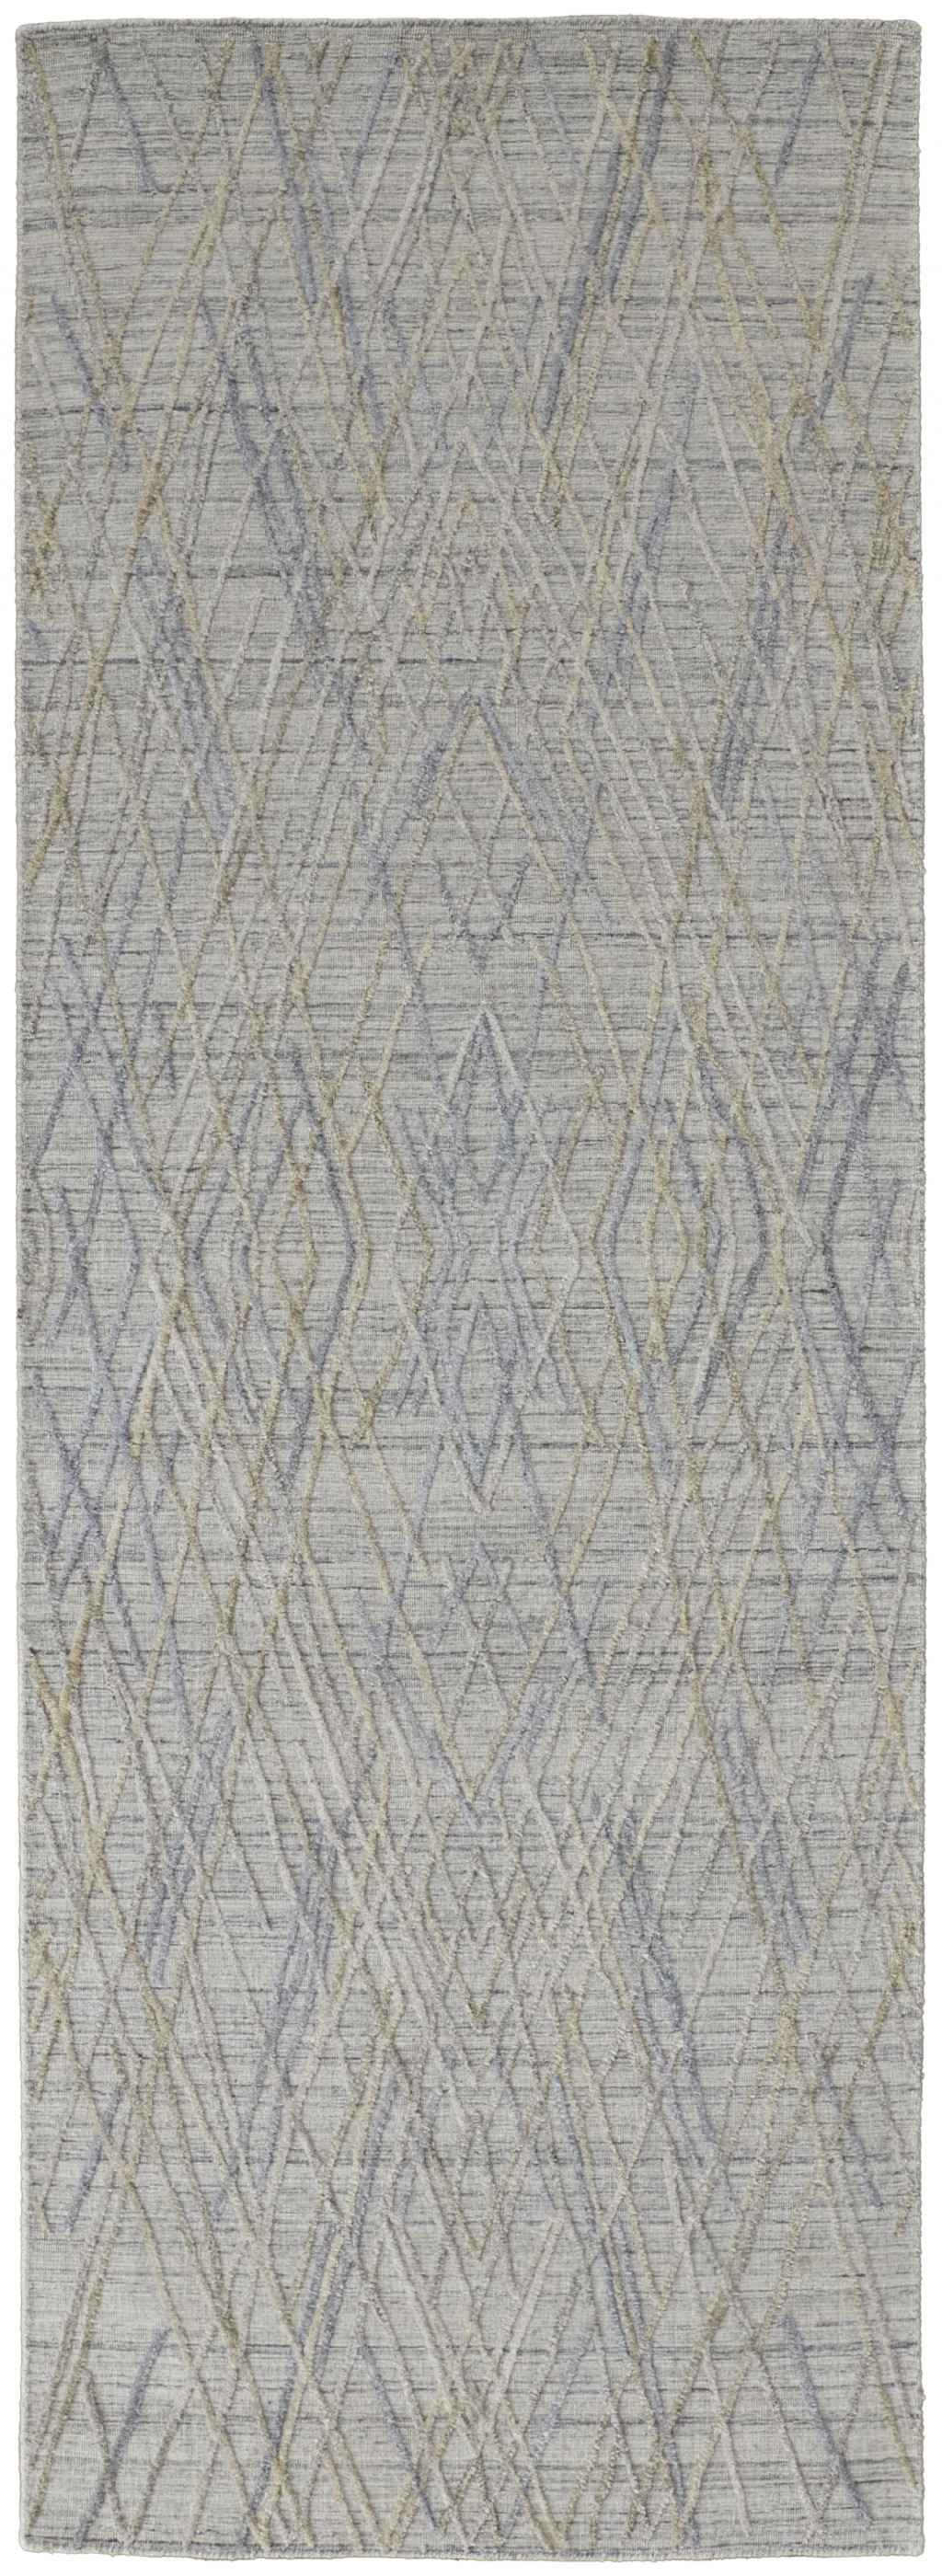 10' Gray And Ivory Abstract Hand Woven Runner Rug-513540-1